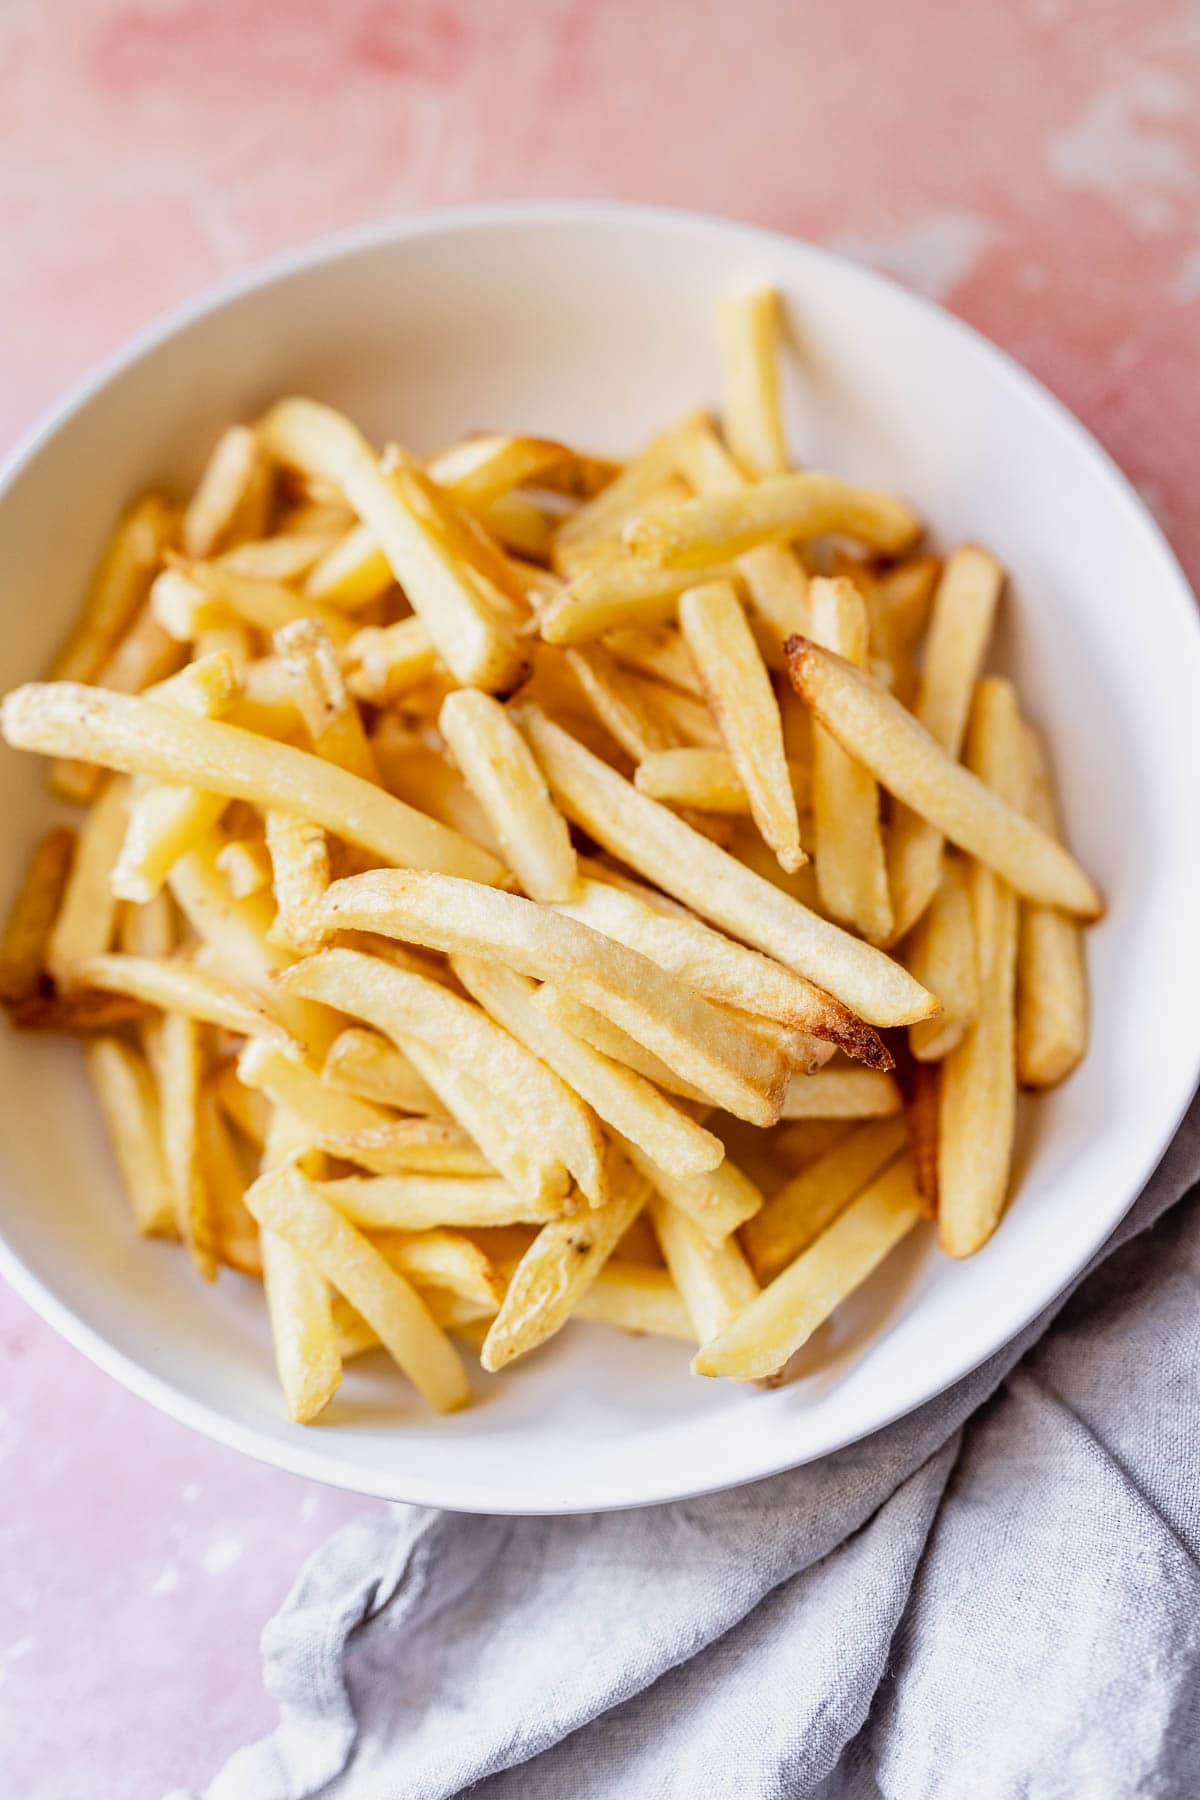 A bowl of golden air fryer frozen French fries on a pink surface with a gray napkin.